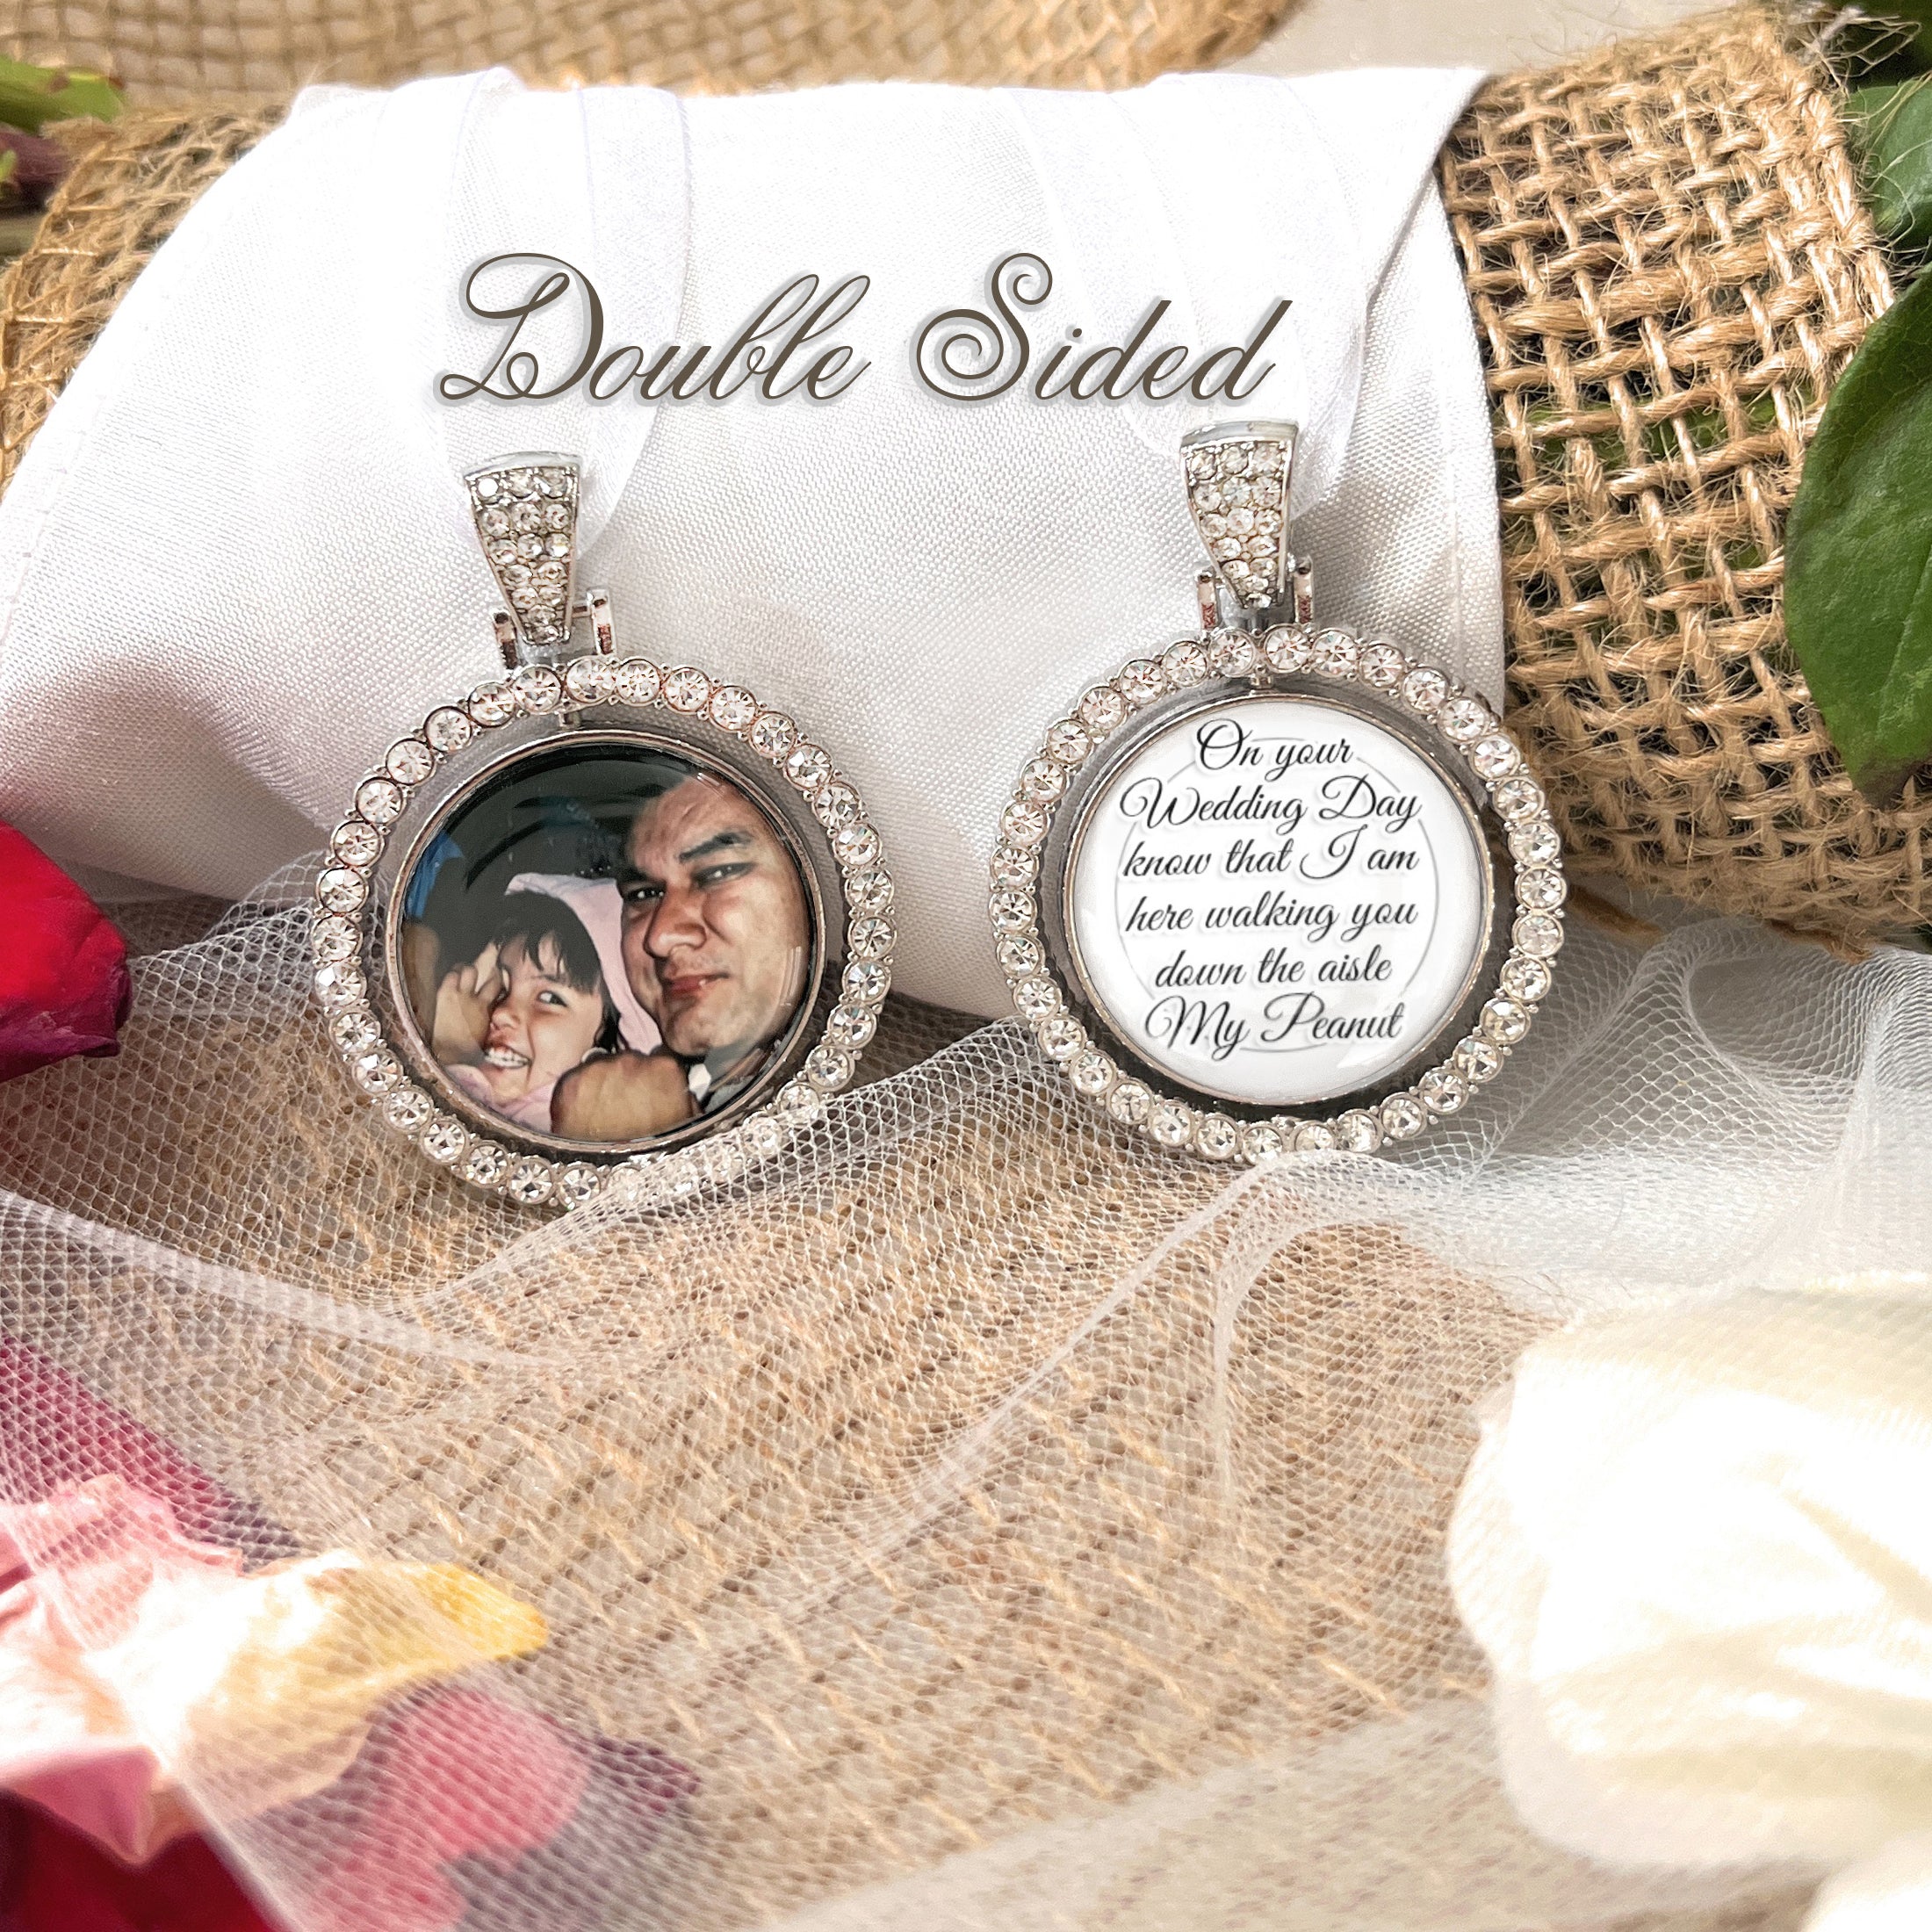 Personalized Gift for Bride Wedding Bouquet Charm Custom Pet